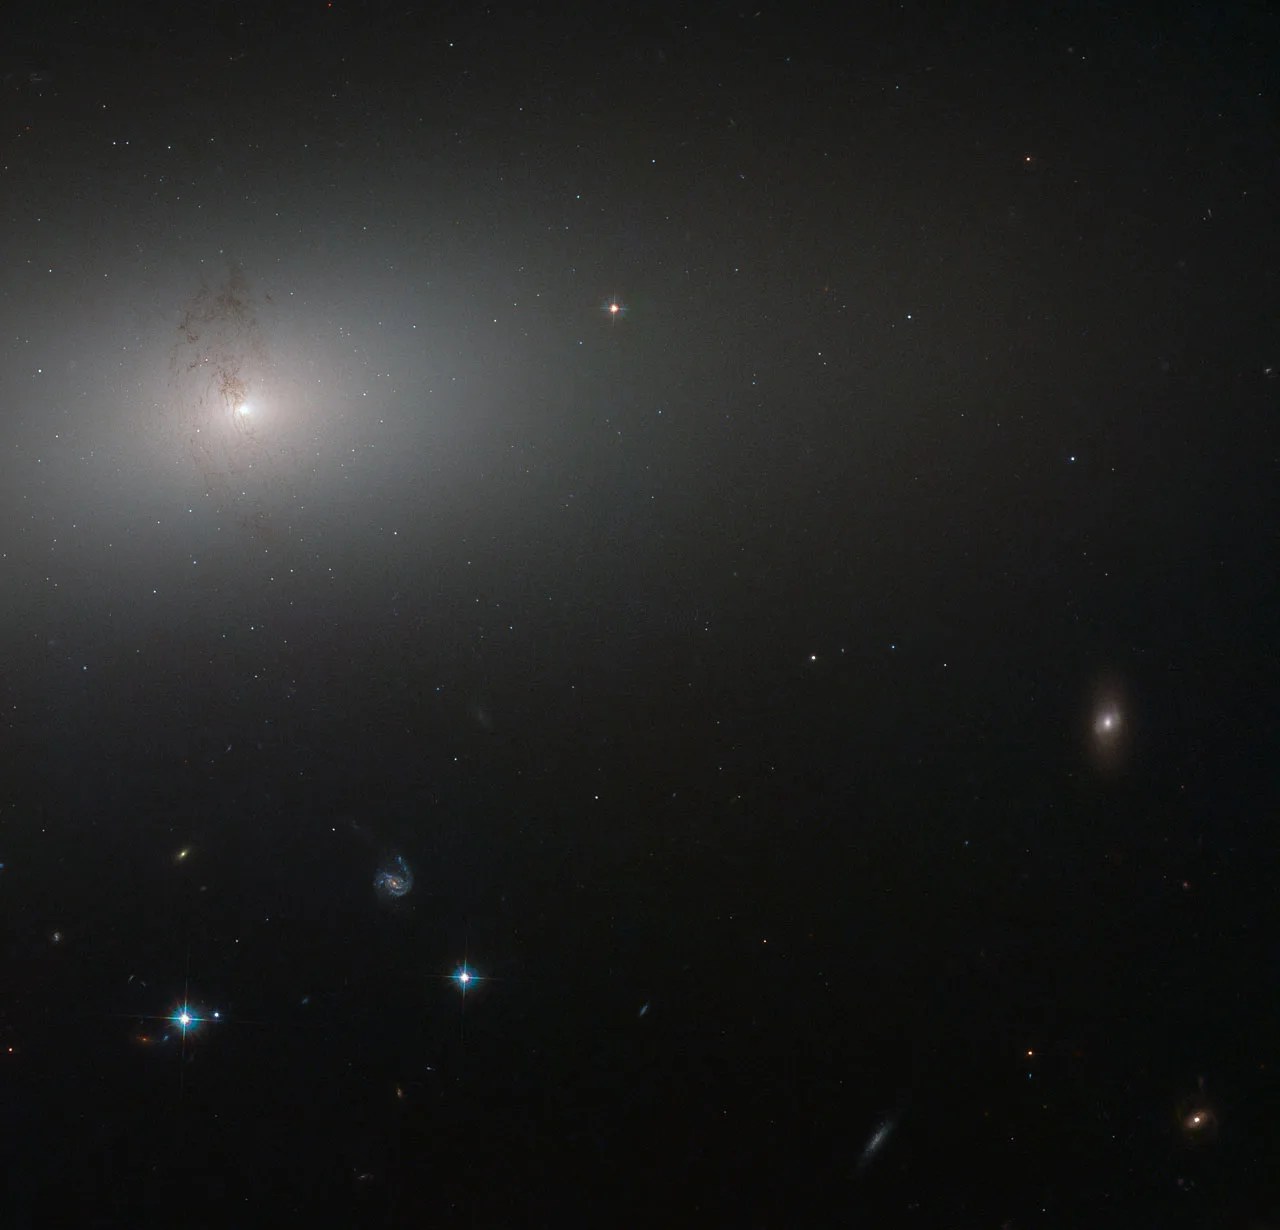 A distant elliptical galaxy is a soft white glow around a bright white core. The glow slowly fades out into the darkness of space, where a scattering of other smaller and more distant galaxies are visible. A swirl of dark dust lanes is visible agains the ellipitcal's glow.